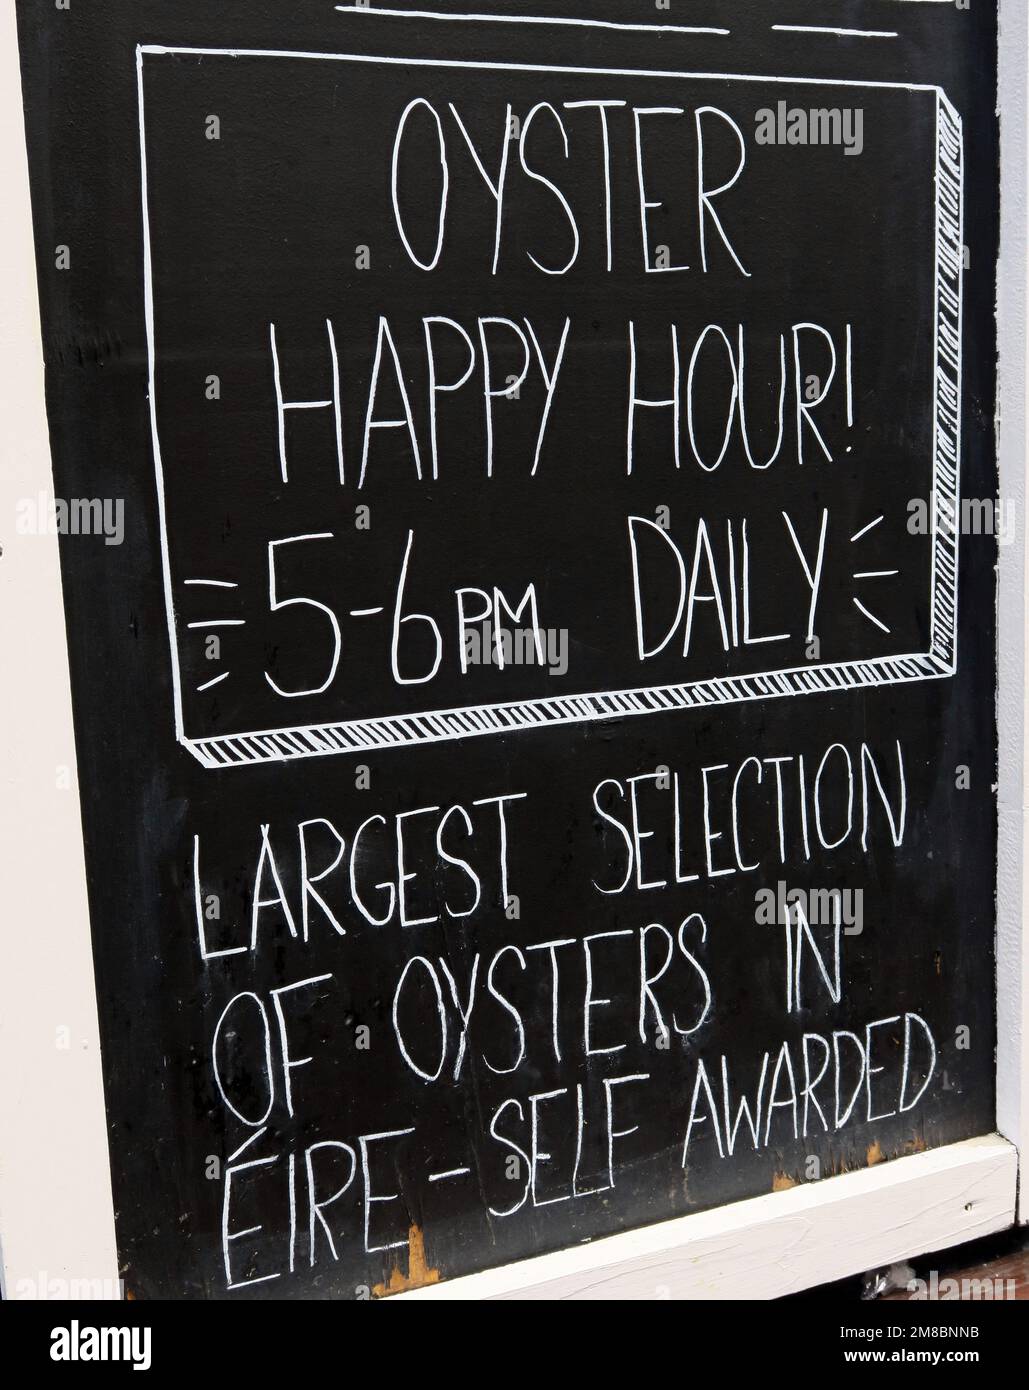 Oyster Happy Hour, 5-6pm, daily, blackboard sign, Eire, Ireland Stock Photo